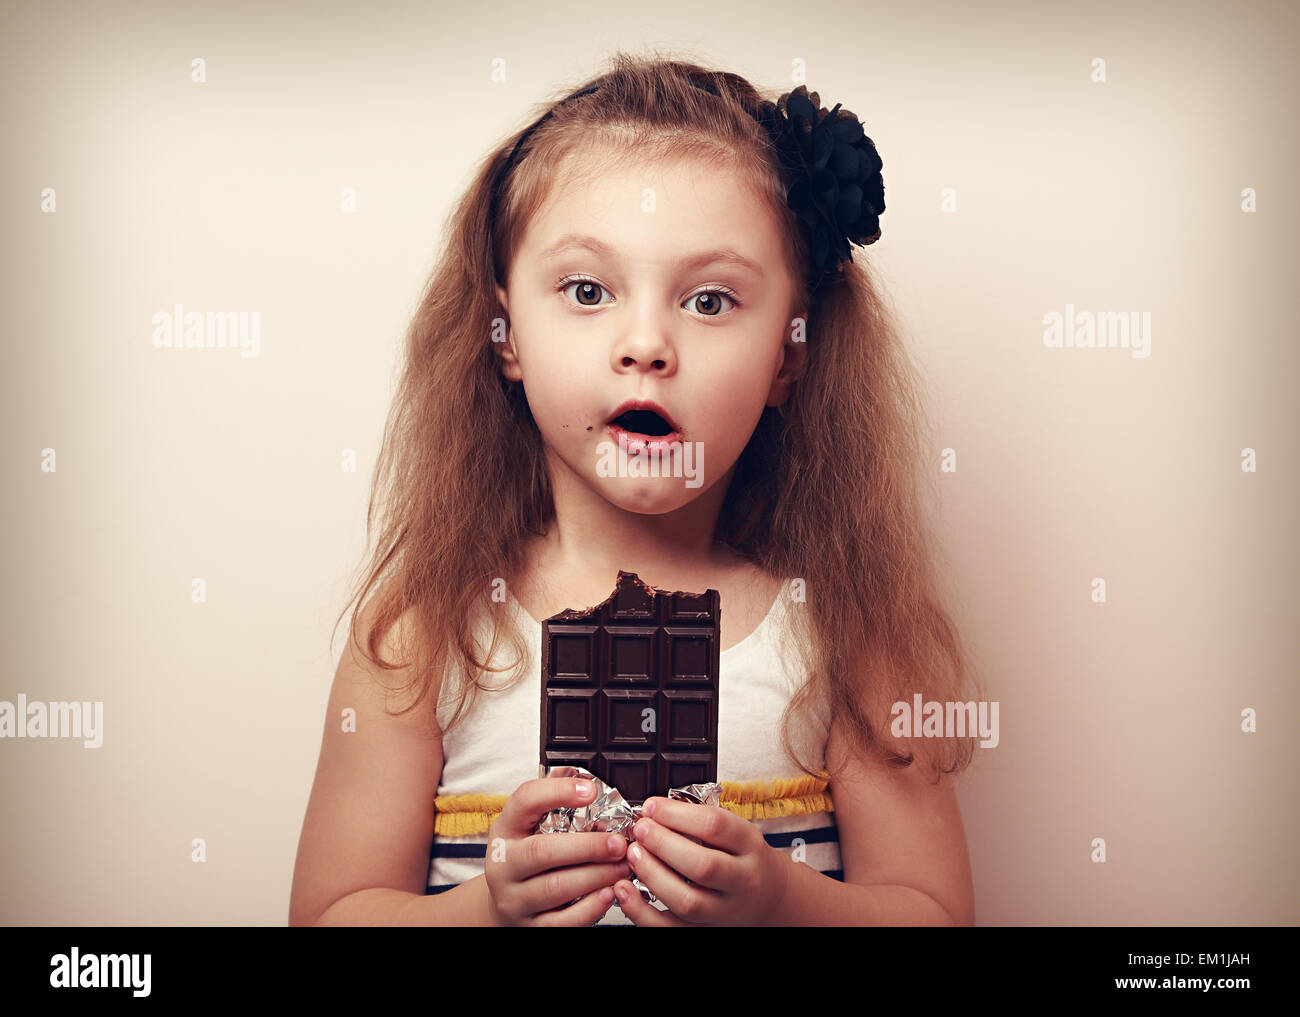 Surprising kid girl looking with big eyes and holding chocolate. Vintage portrait Stock Photo